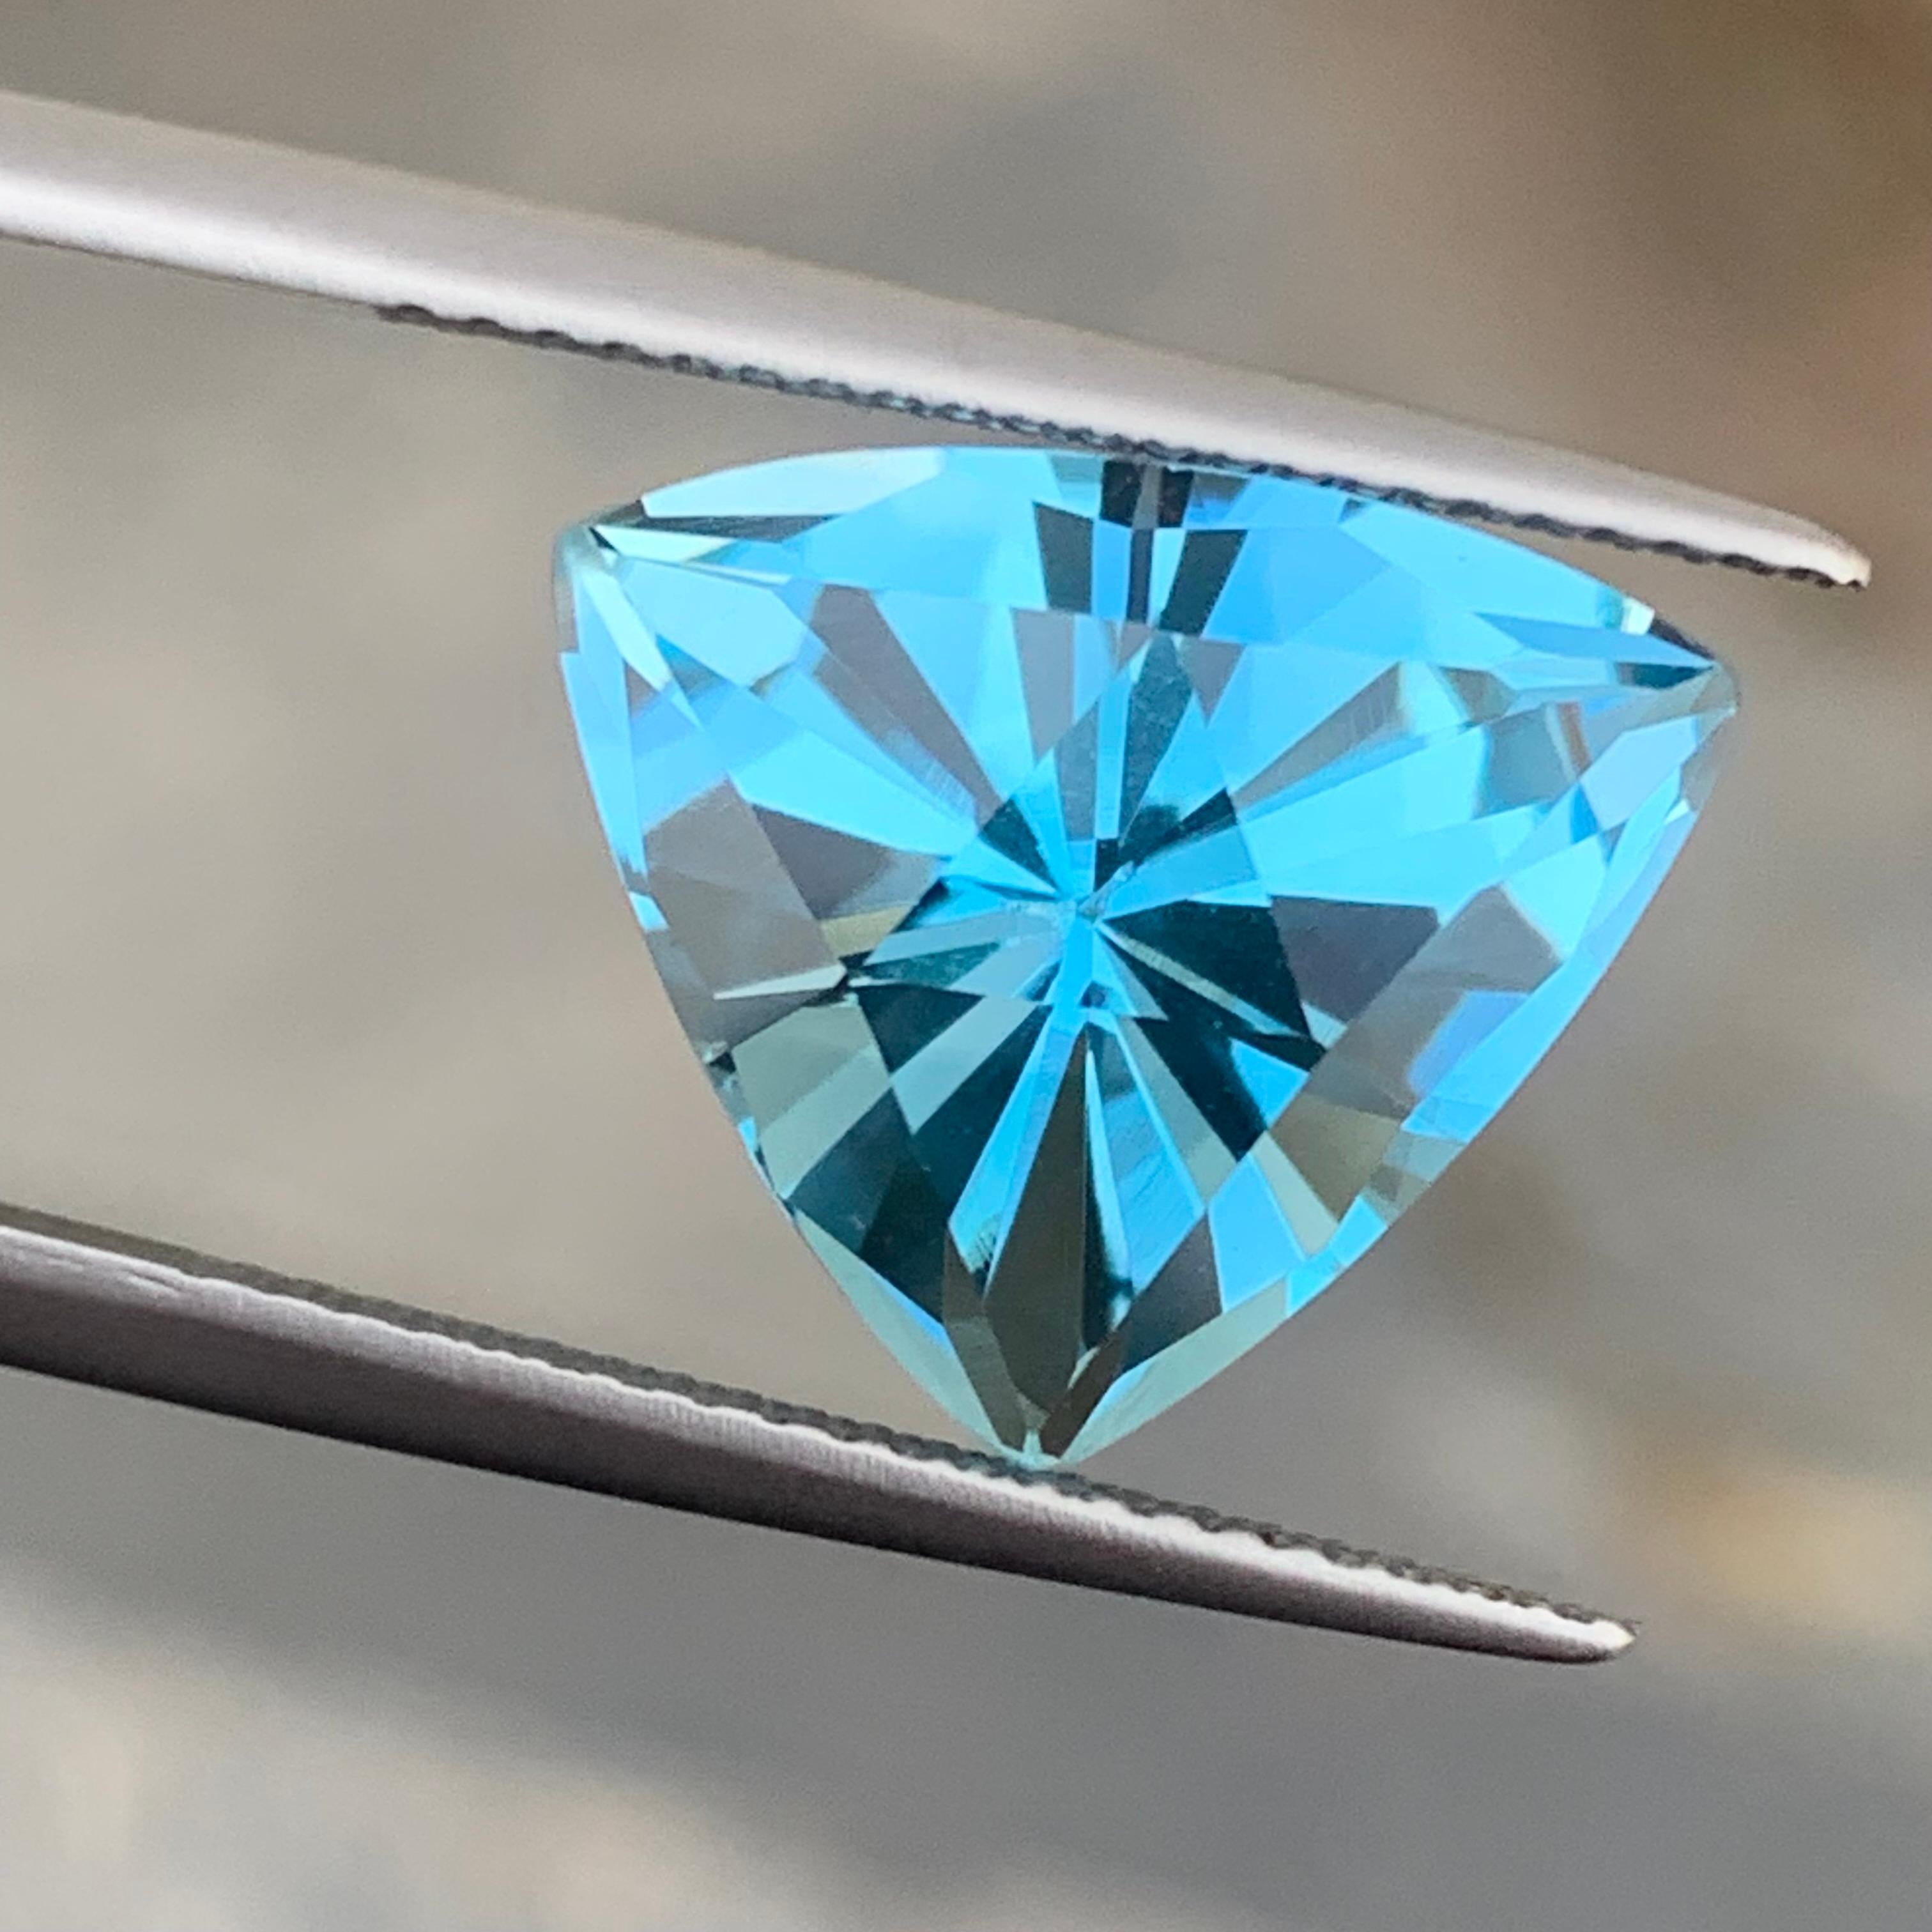 Genuine 9.0 Carat Trillion Cut Loose Blue Topaz from Brazil Available for Sell For Sale 3